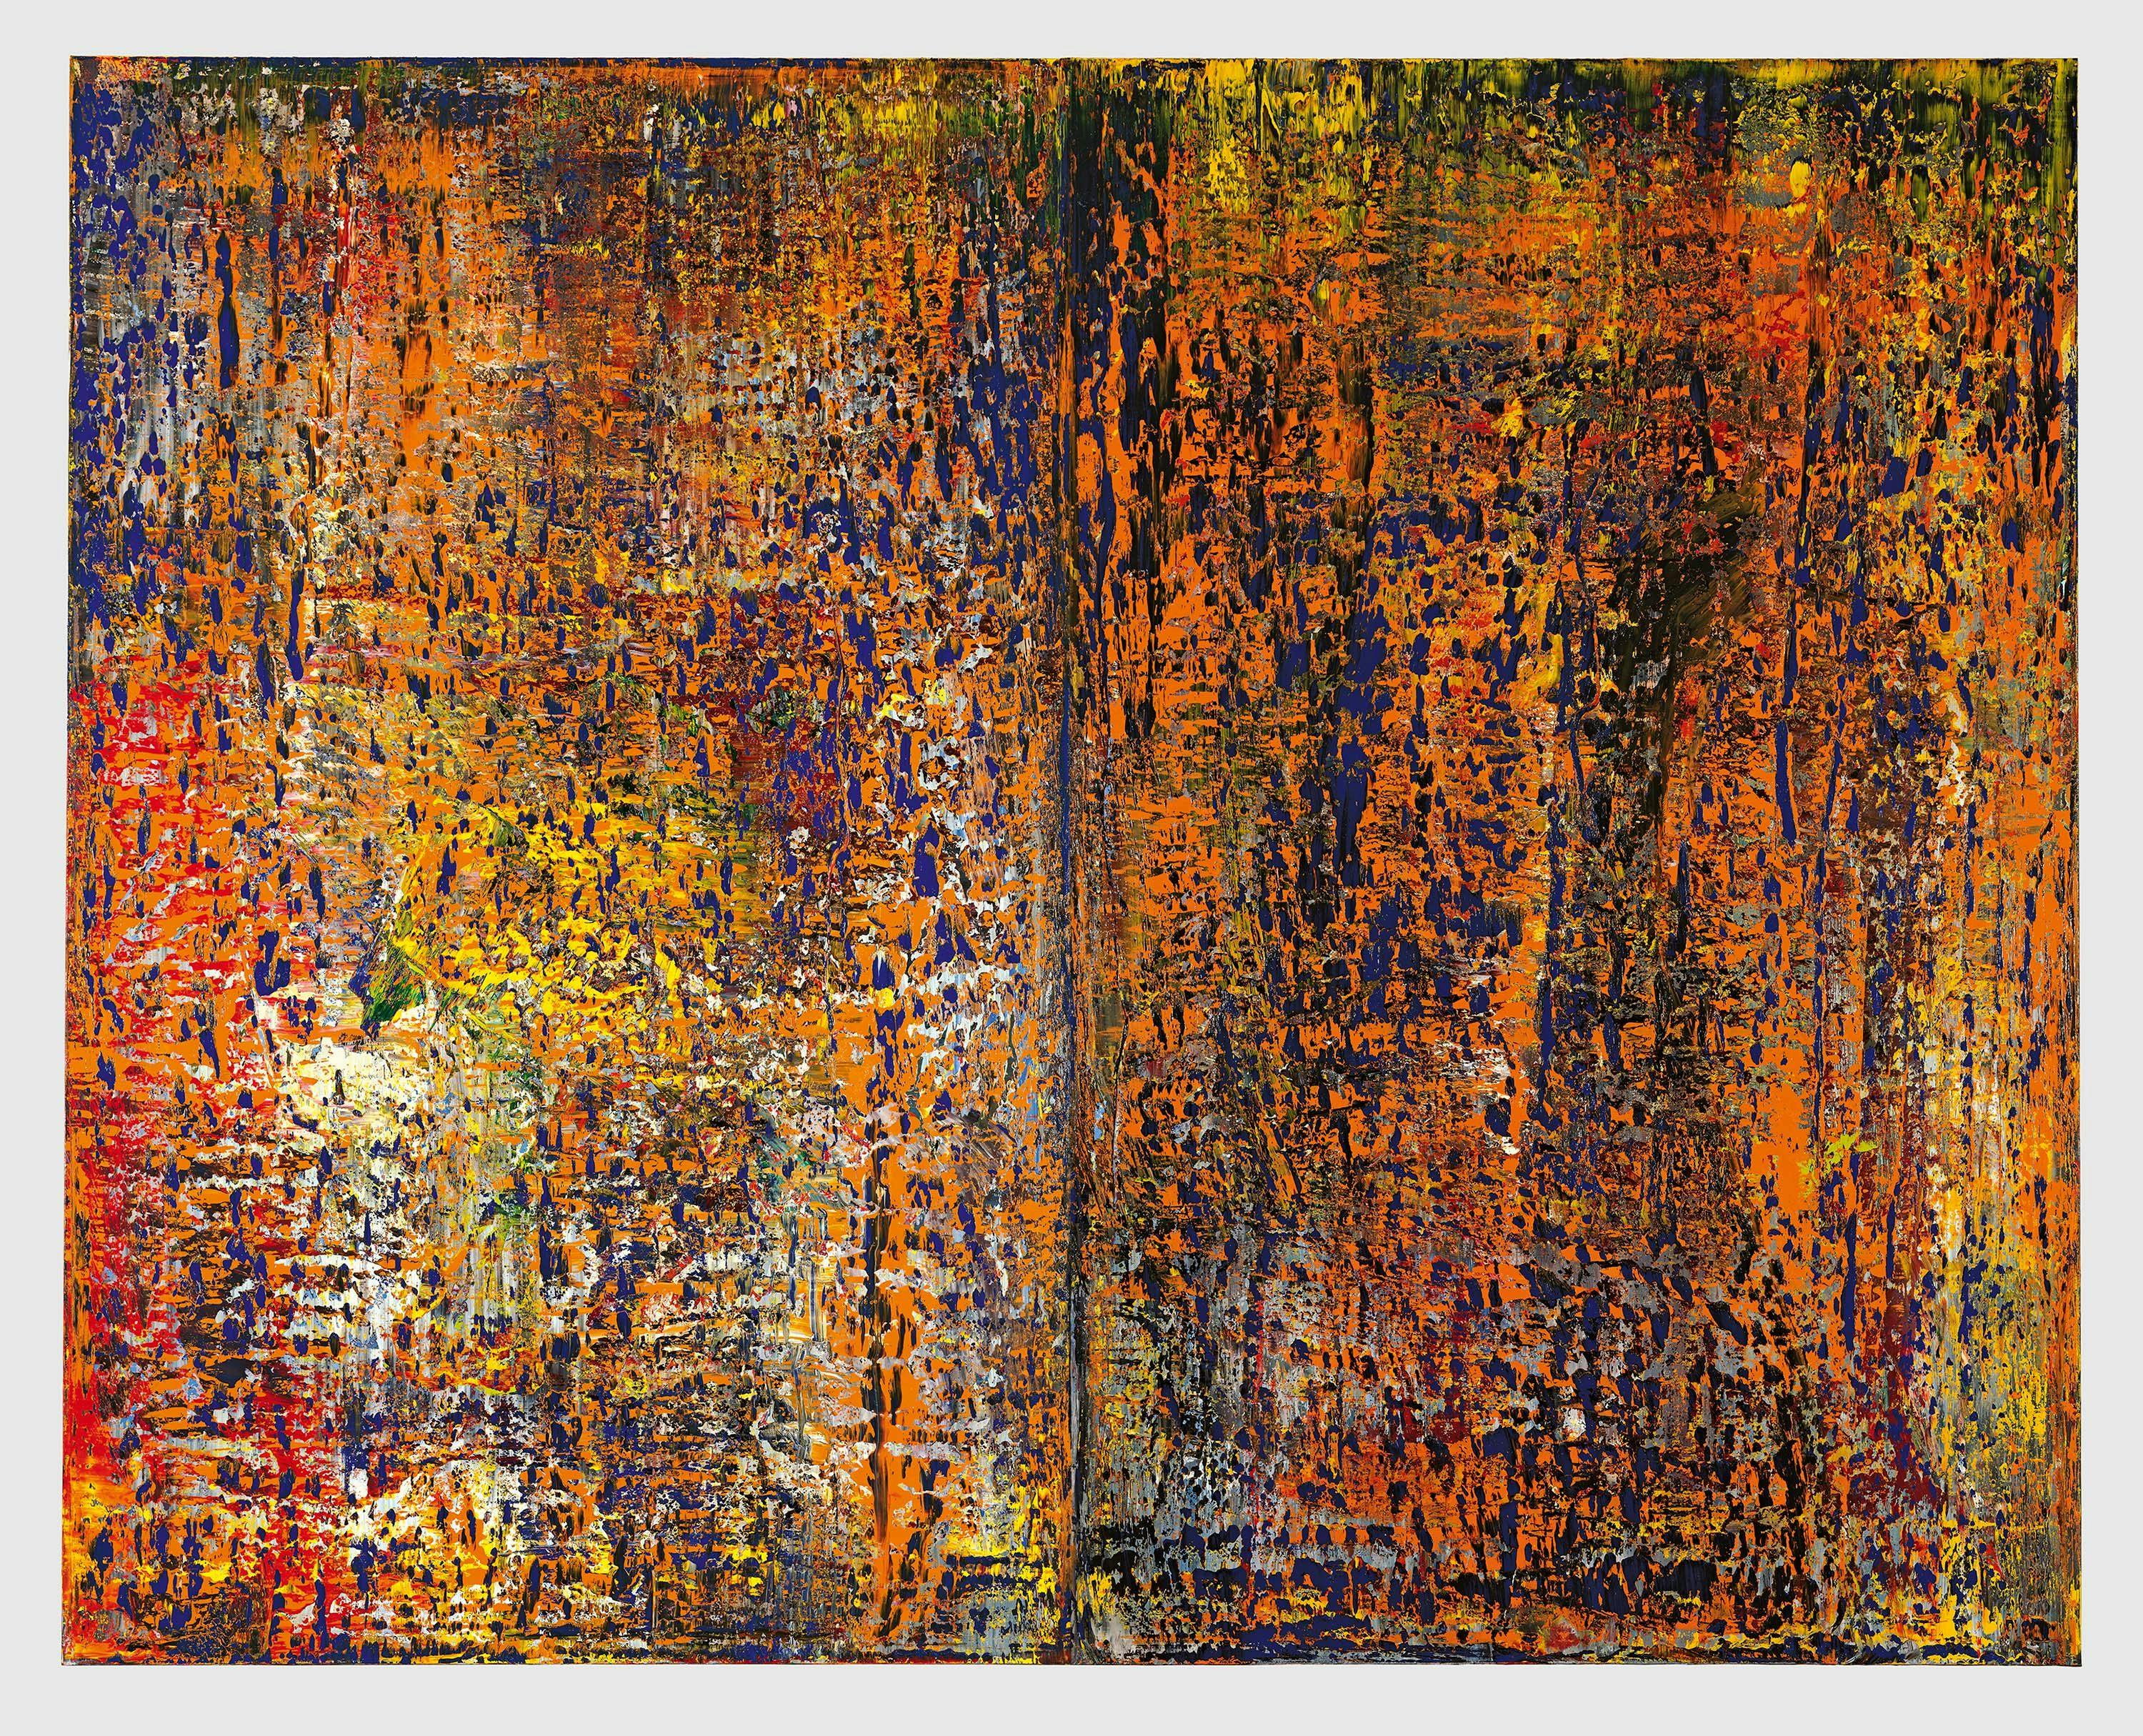 A painting by Gerhard Richter, titled Abstraktes Bild (Abstract Painting), dated 1989.